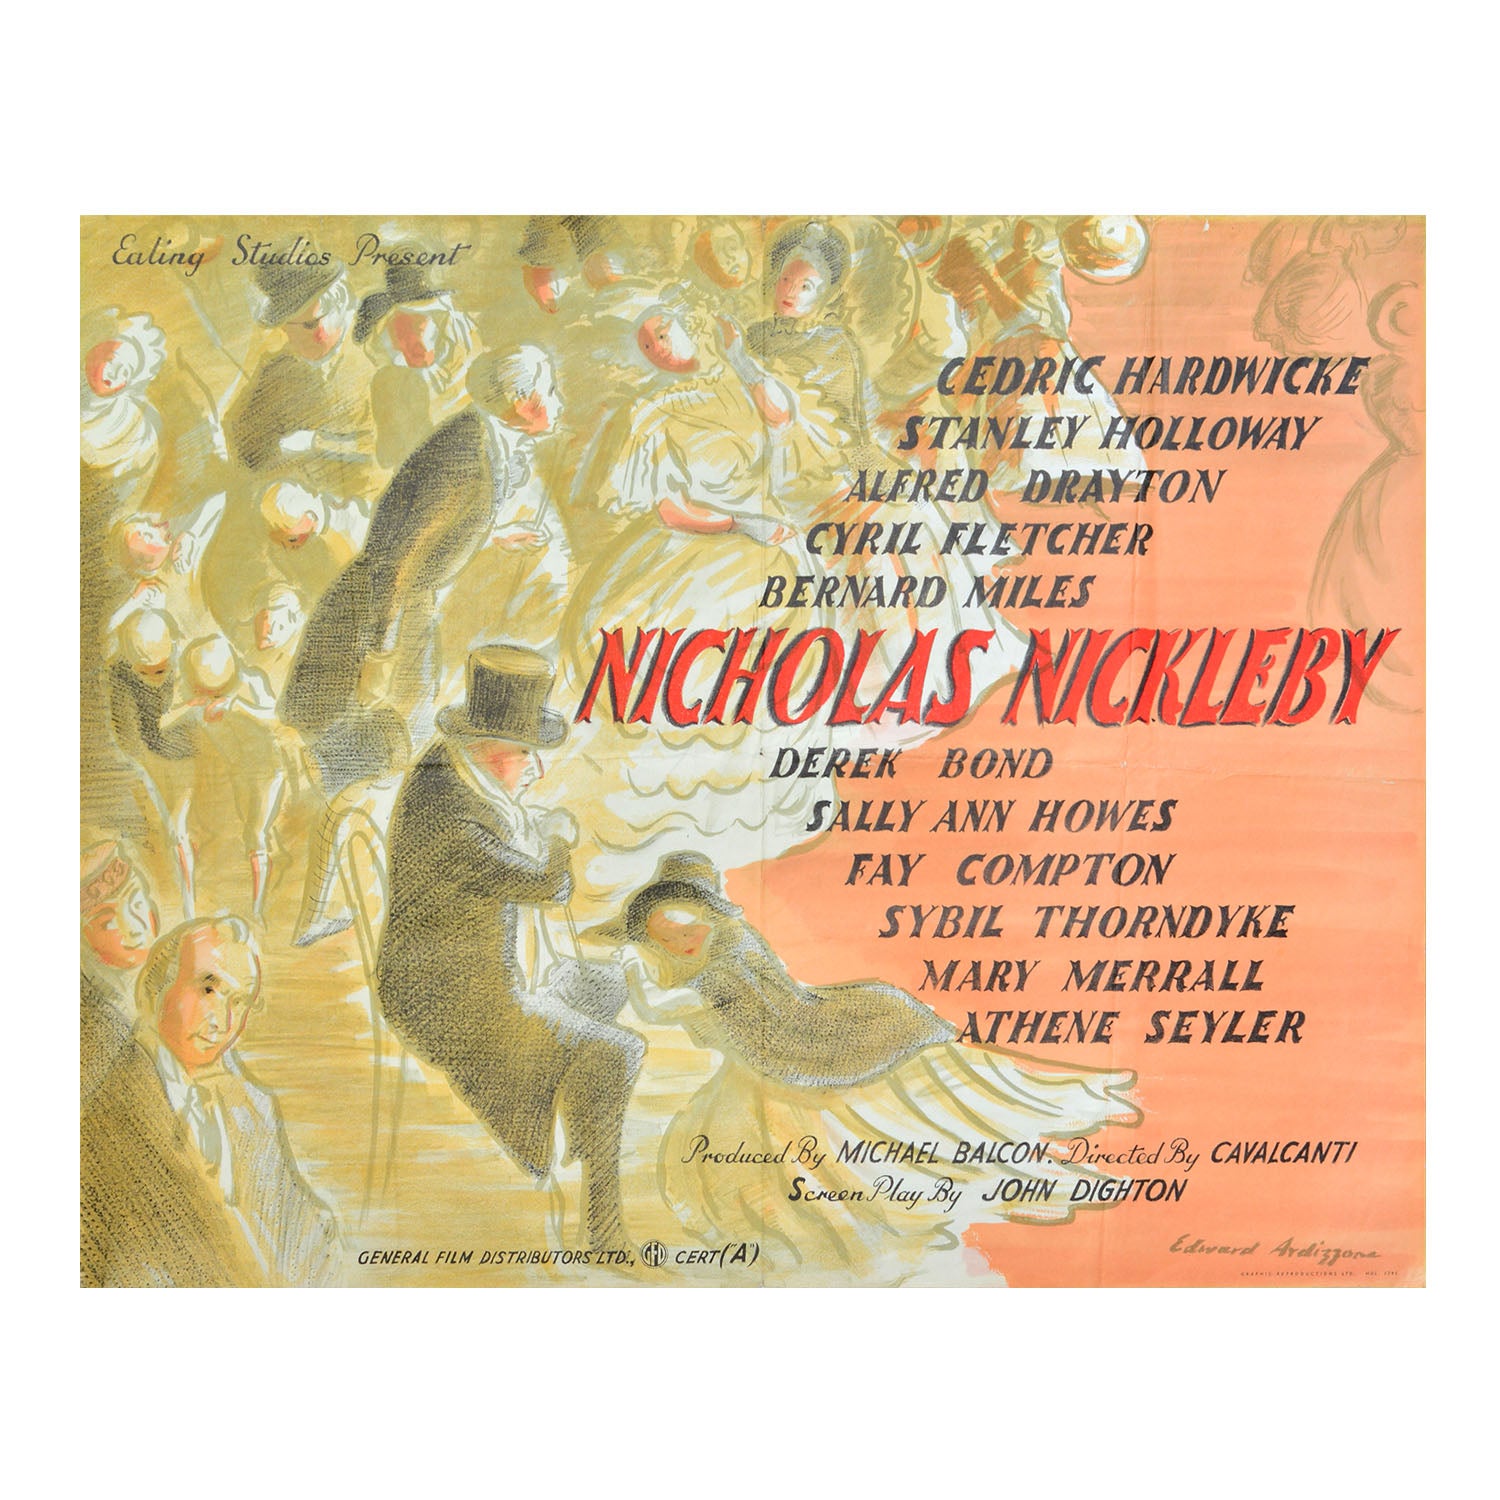 original 1947 film poster for The Life and Adventures of Nicholas Nickleby, designed by Edward Ardizzone. Charles Dickens, Ealing Studios, Alberto Cavalcanti